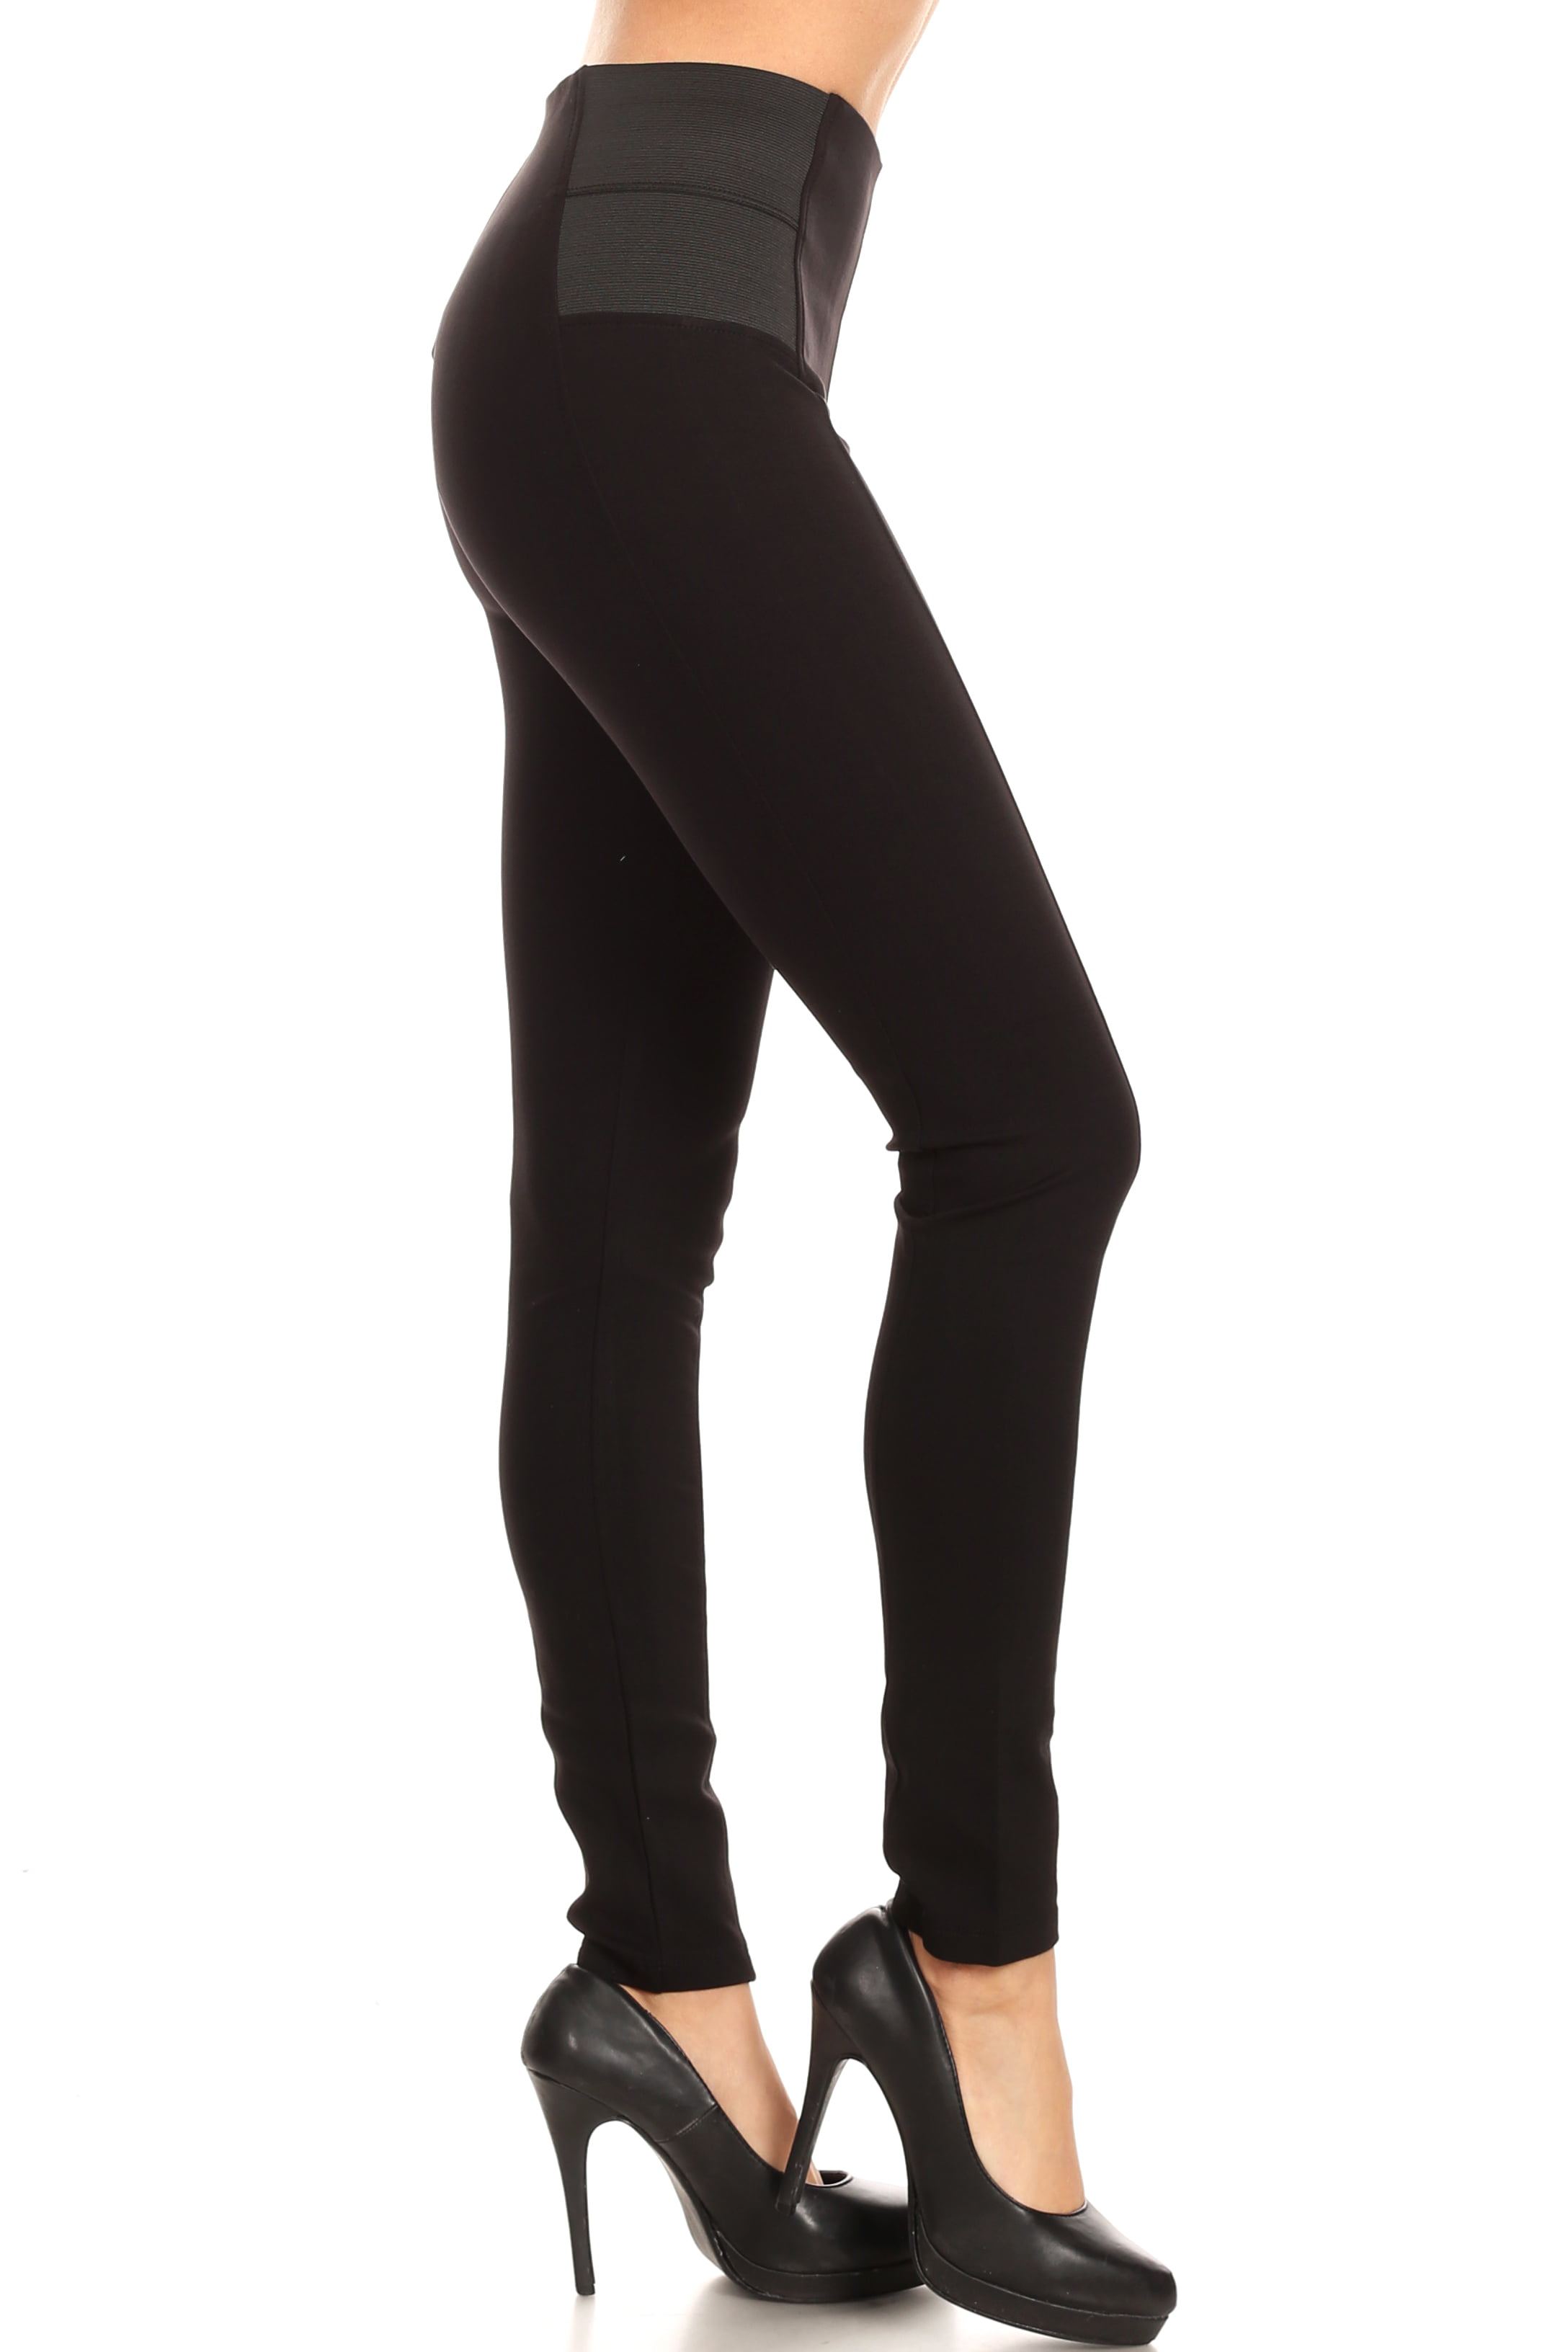 2ND DATE - Women's Premium High Waisted Stretch Pull On Ponte Pants ...